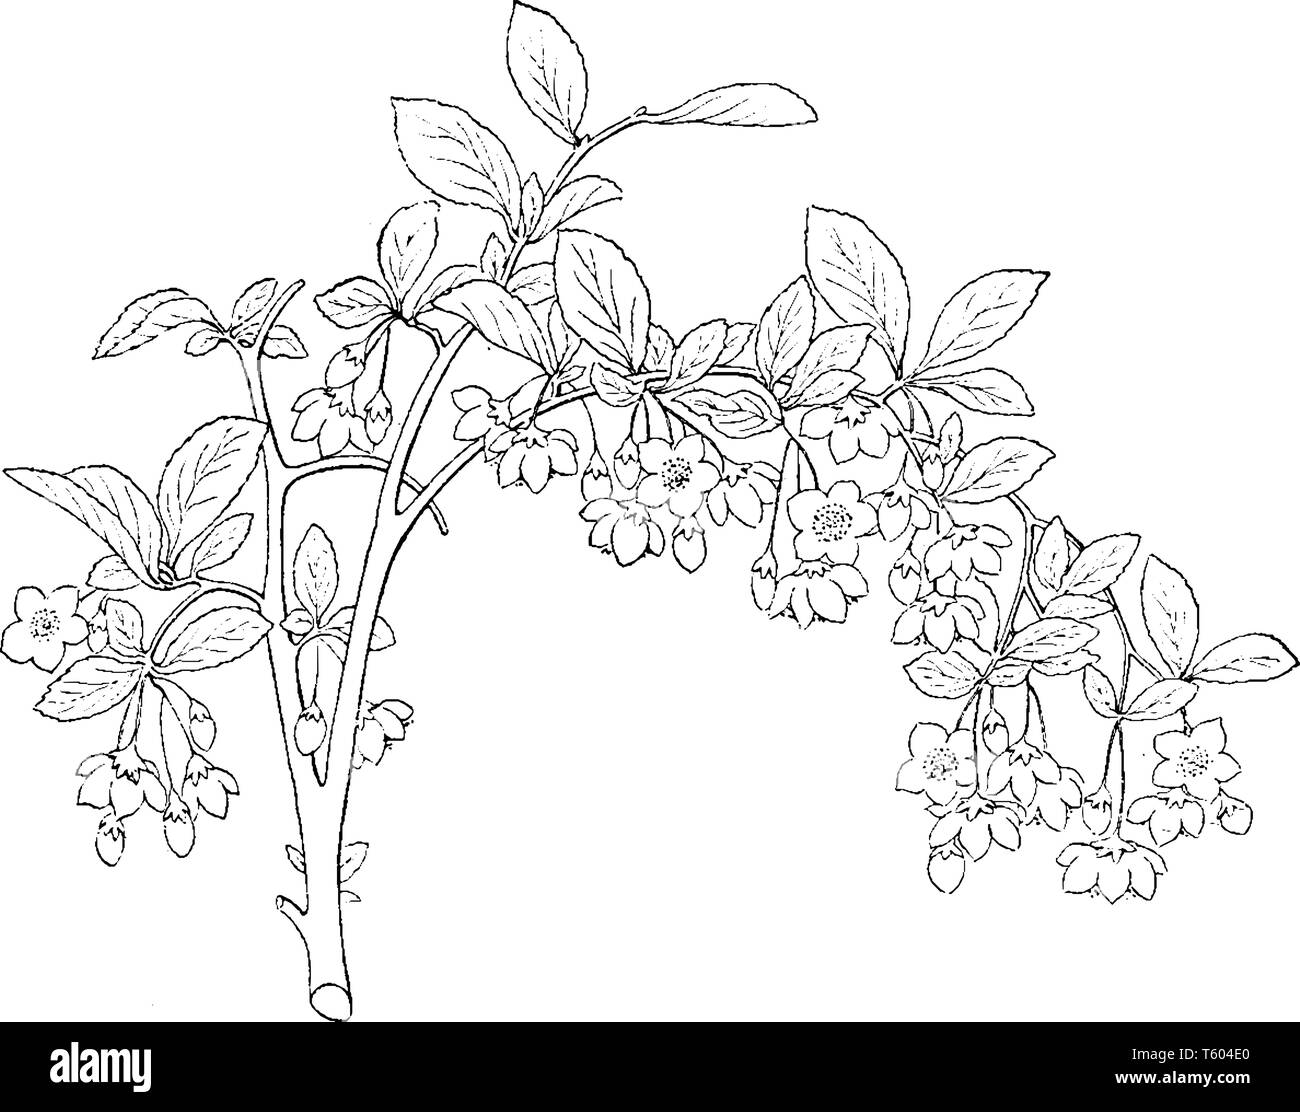 Styrax Japonica is well-known as the Japanese snowbell, is native China, Japan, and Korea in family Styracaceae, vintage line drawing or engraving ill Stock Vector